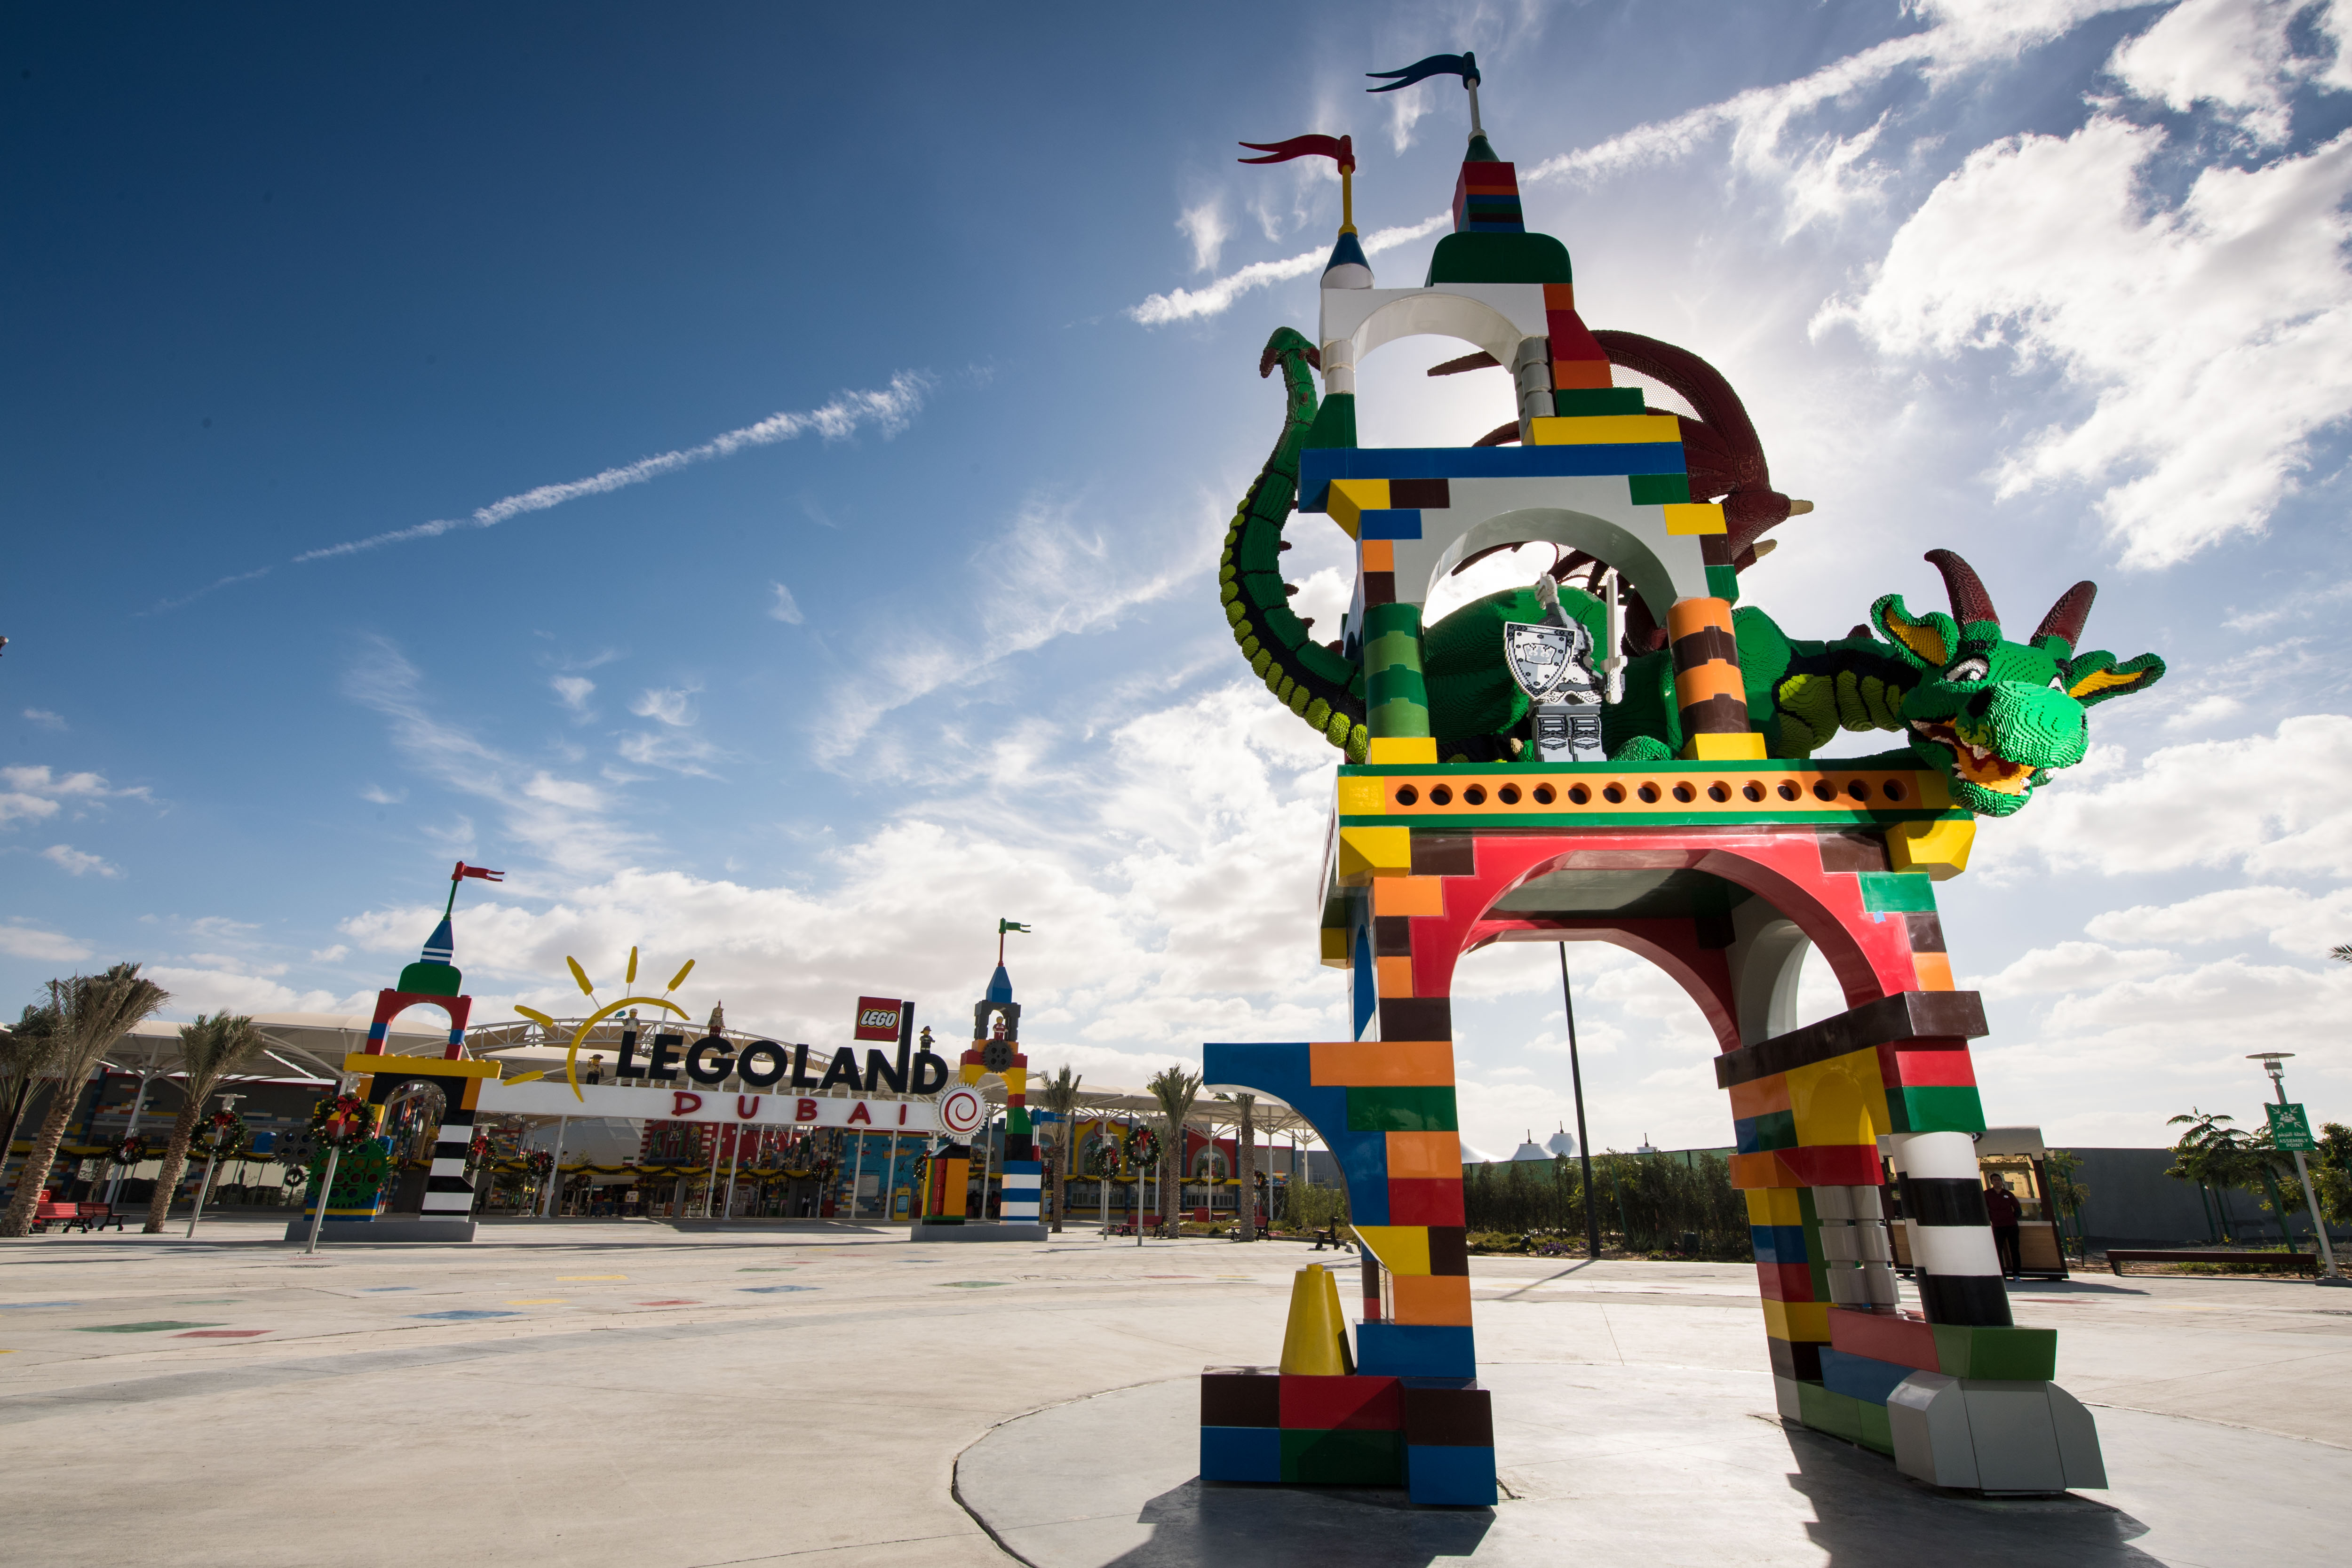 A Weekend At The Dubai Parks and Resorts